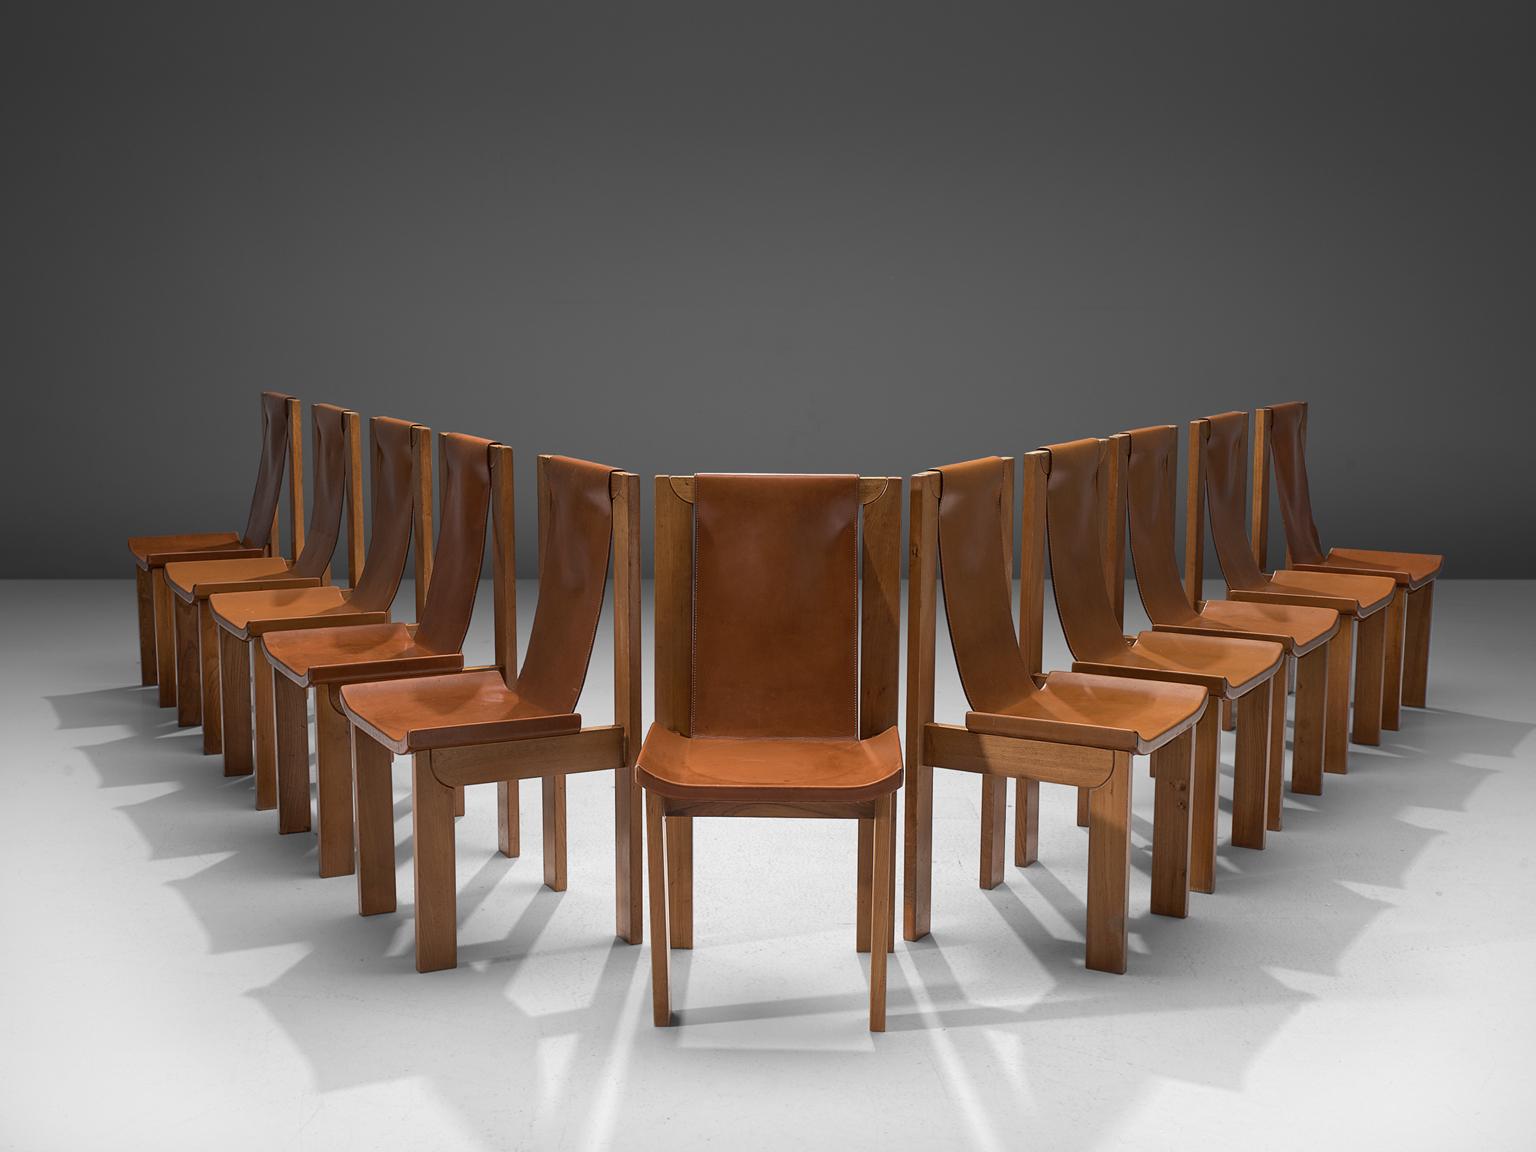 Cognac leather dining chairs with beech, France, 1960s.

Wonderful cognac leather chairs from France, with a geometric, architectural wooden frame. The leather seat is attached to frame on the sides and on the top. This results in a comfortable